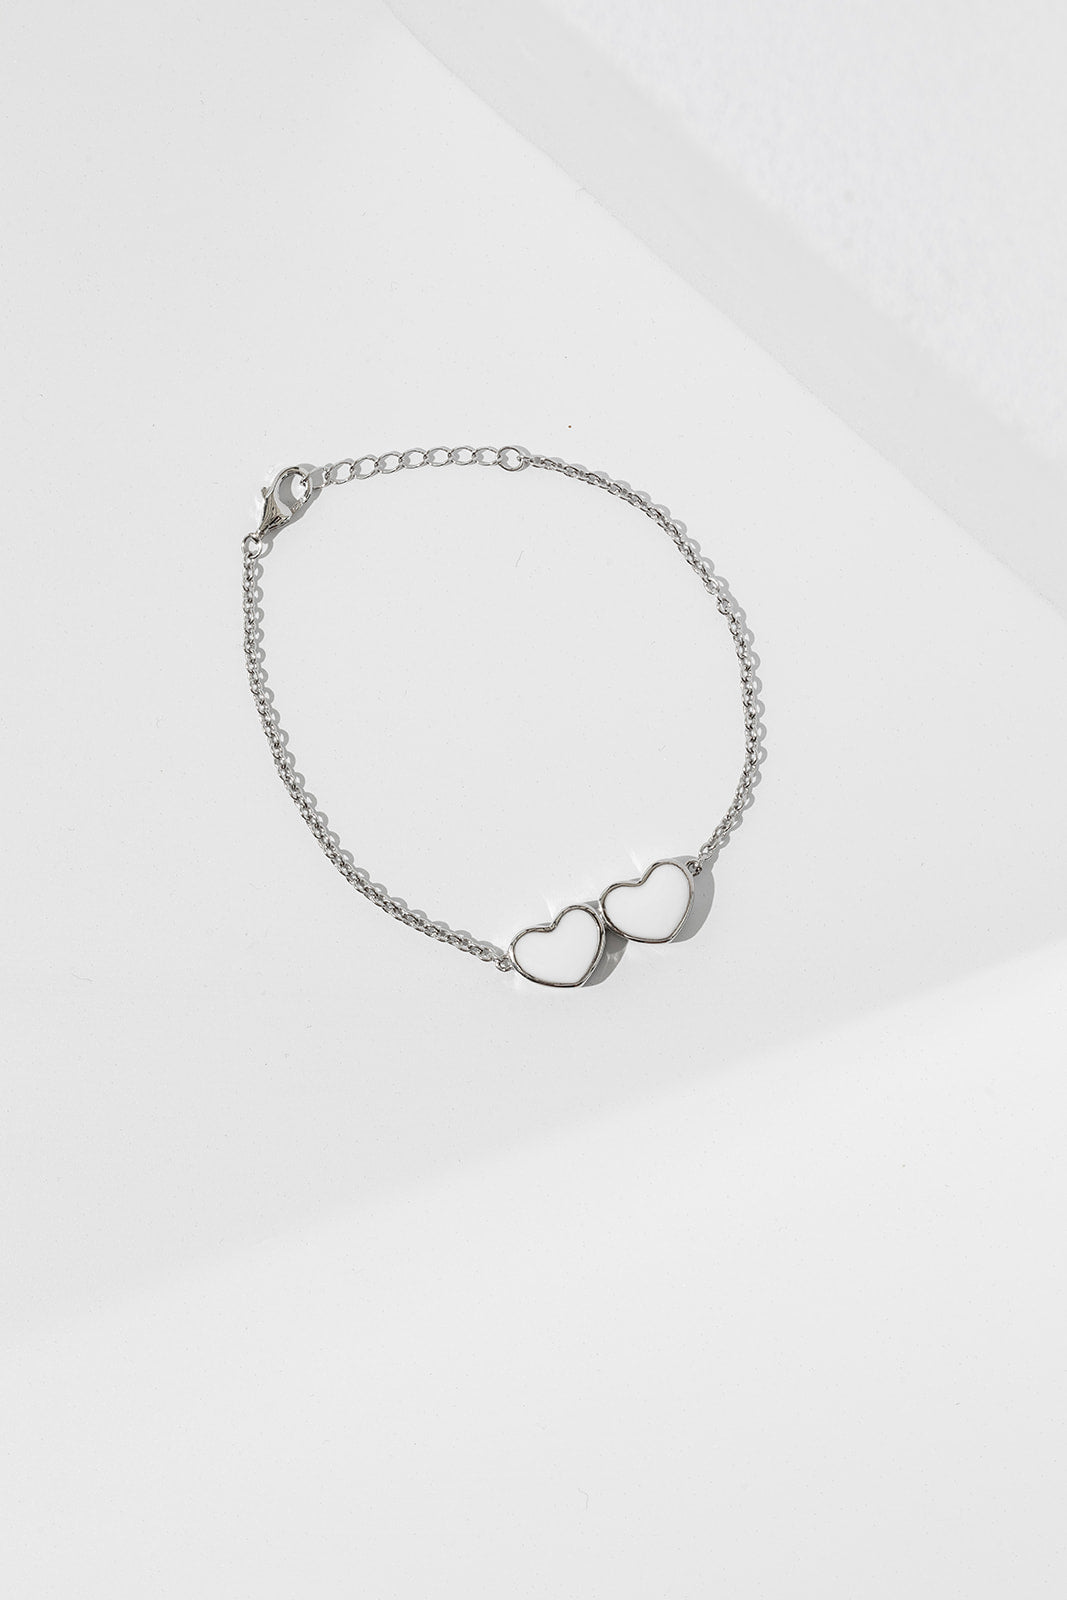 Breastmilk Heart Necklace - White Gold